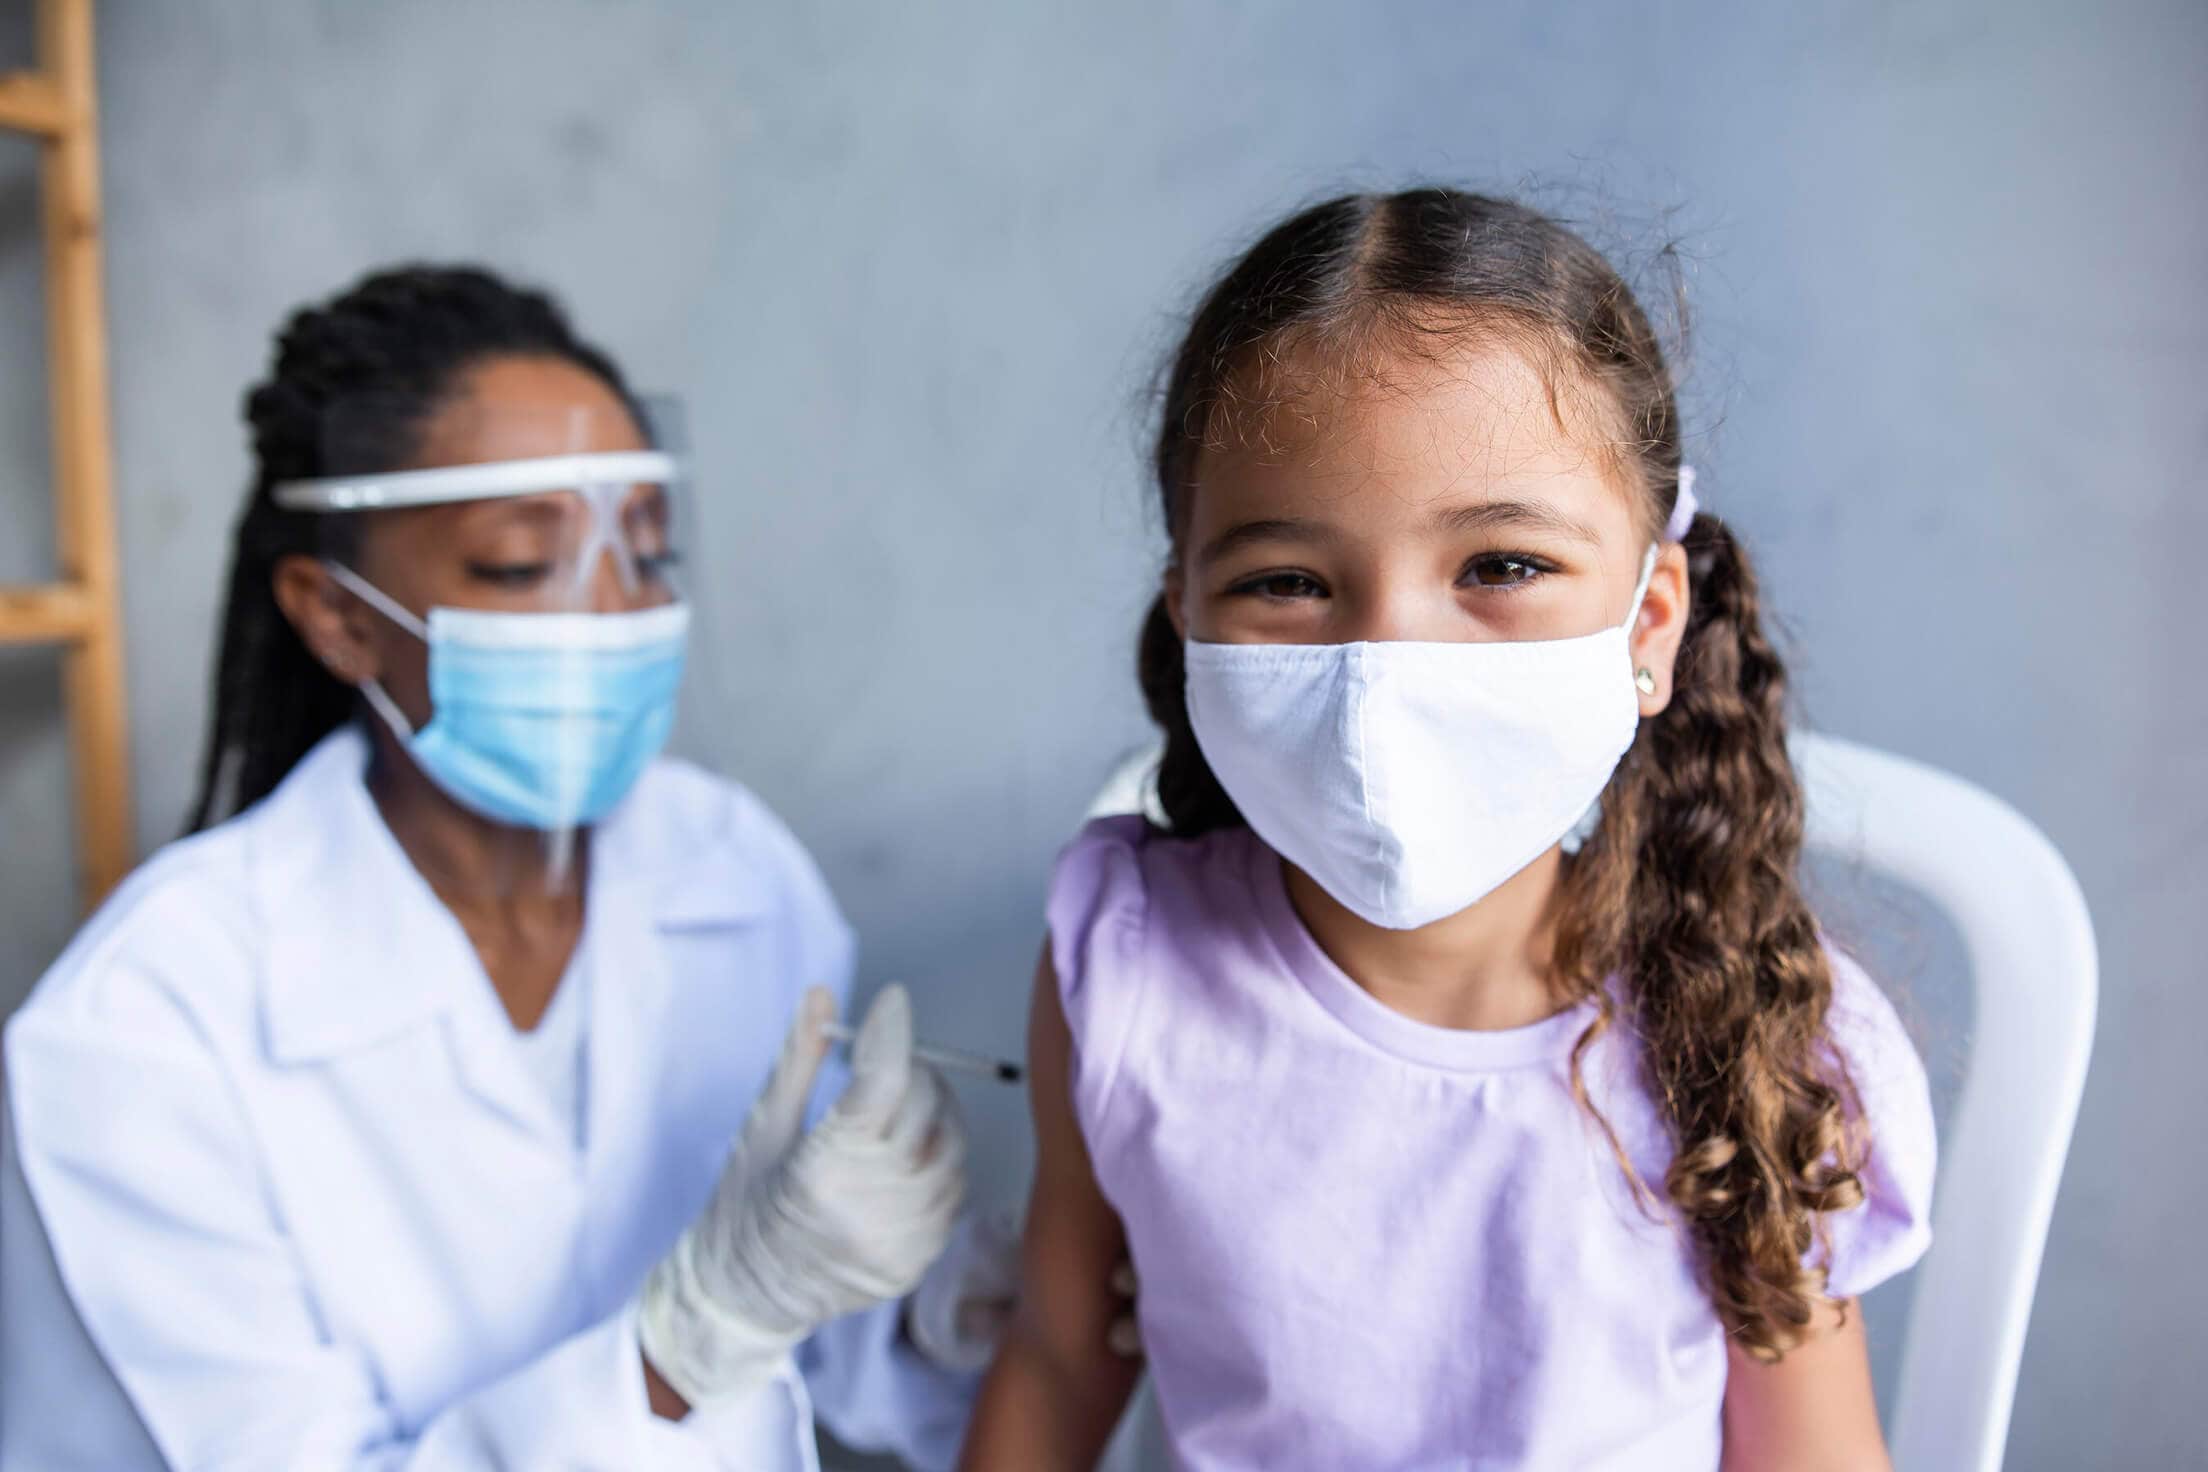 A young girl wearing a mask gets a COVID-19 vaccine from a health care professional wearing a mask and face shield.